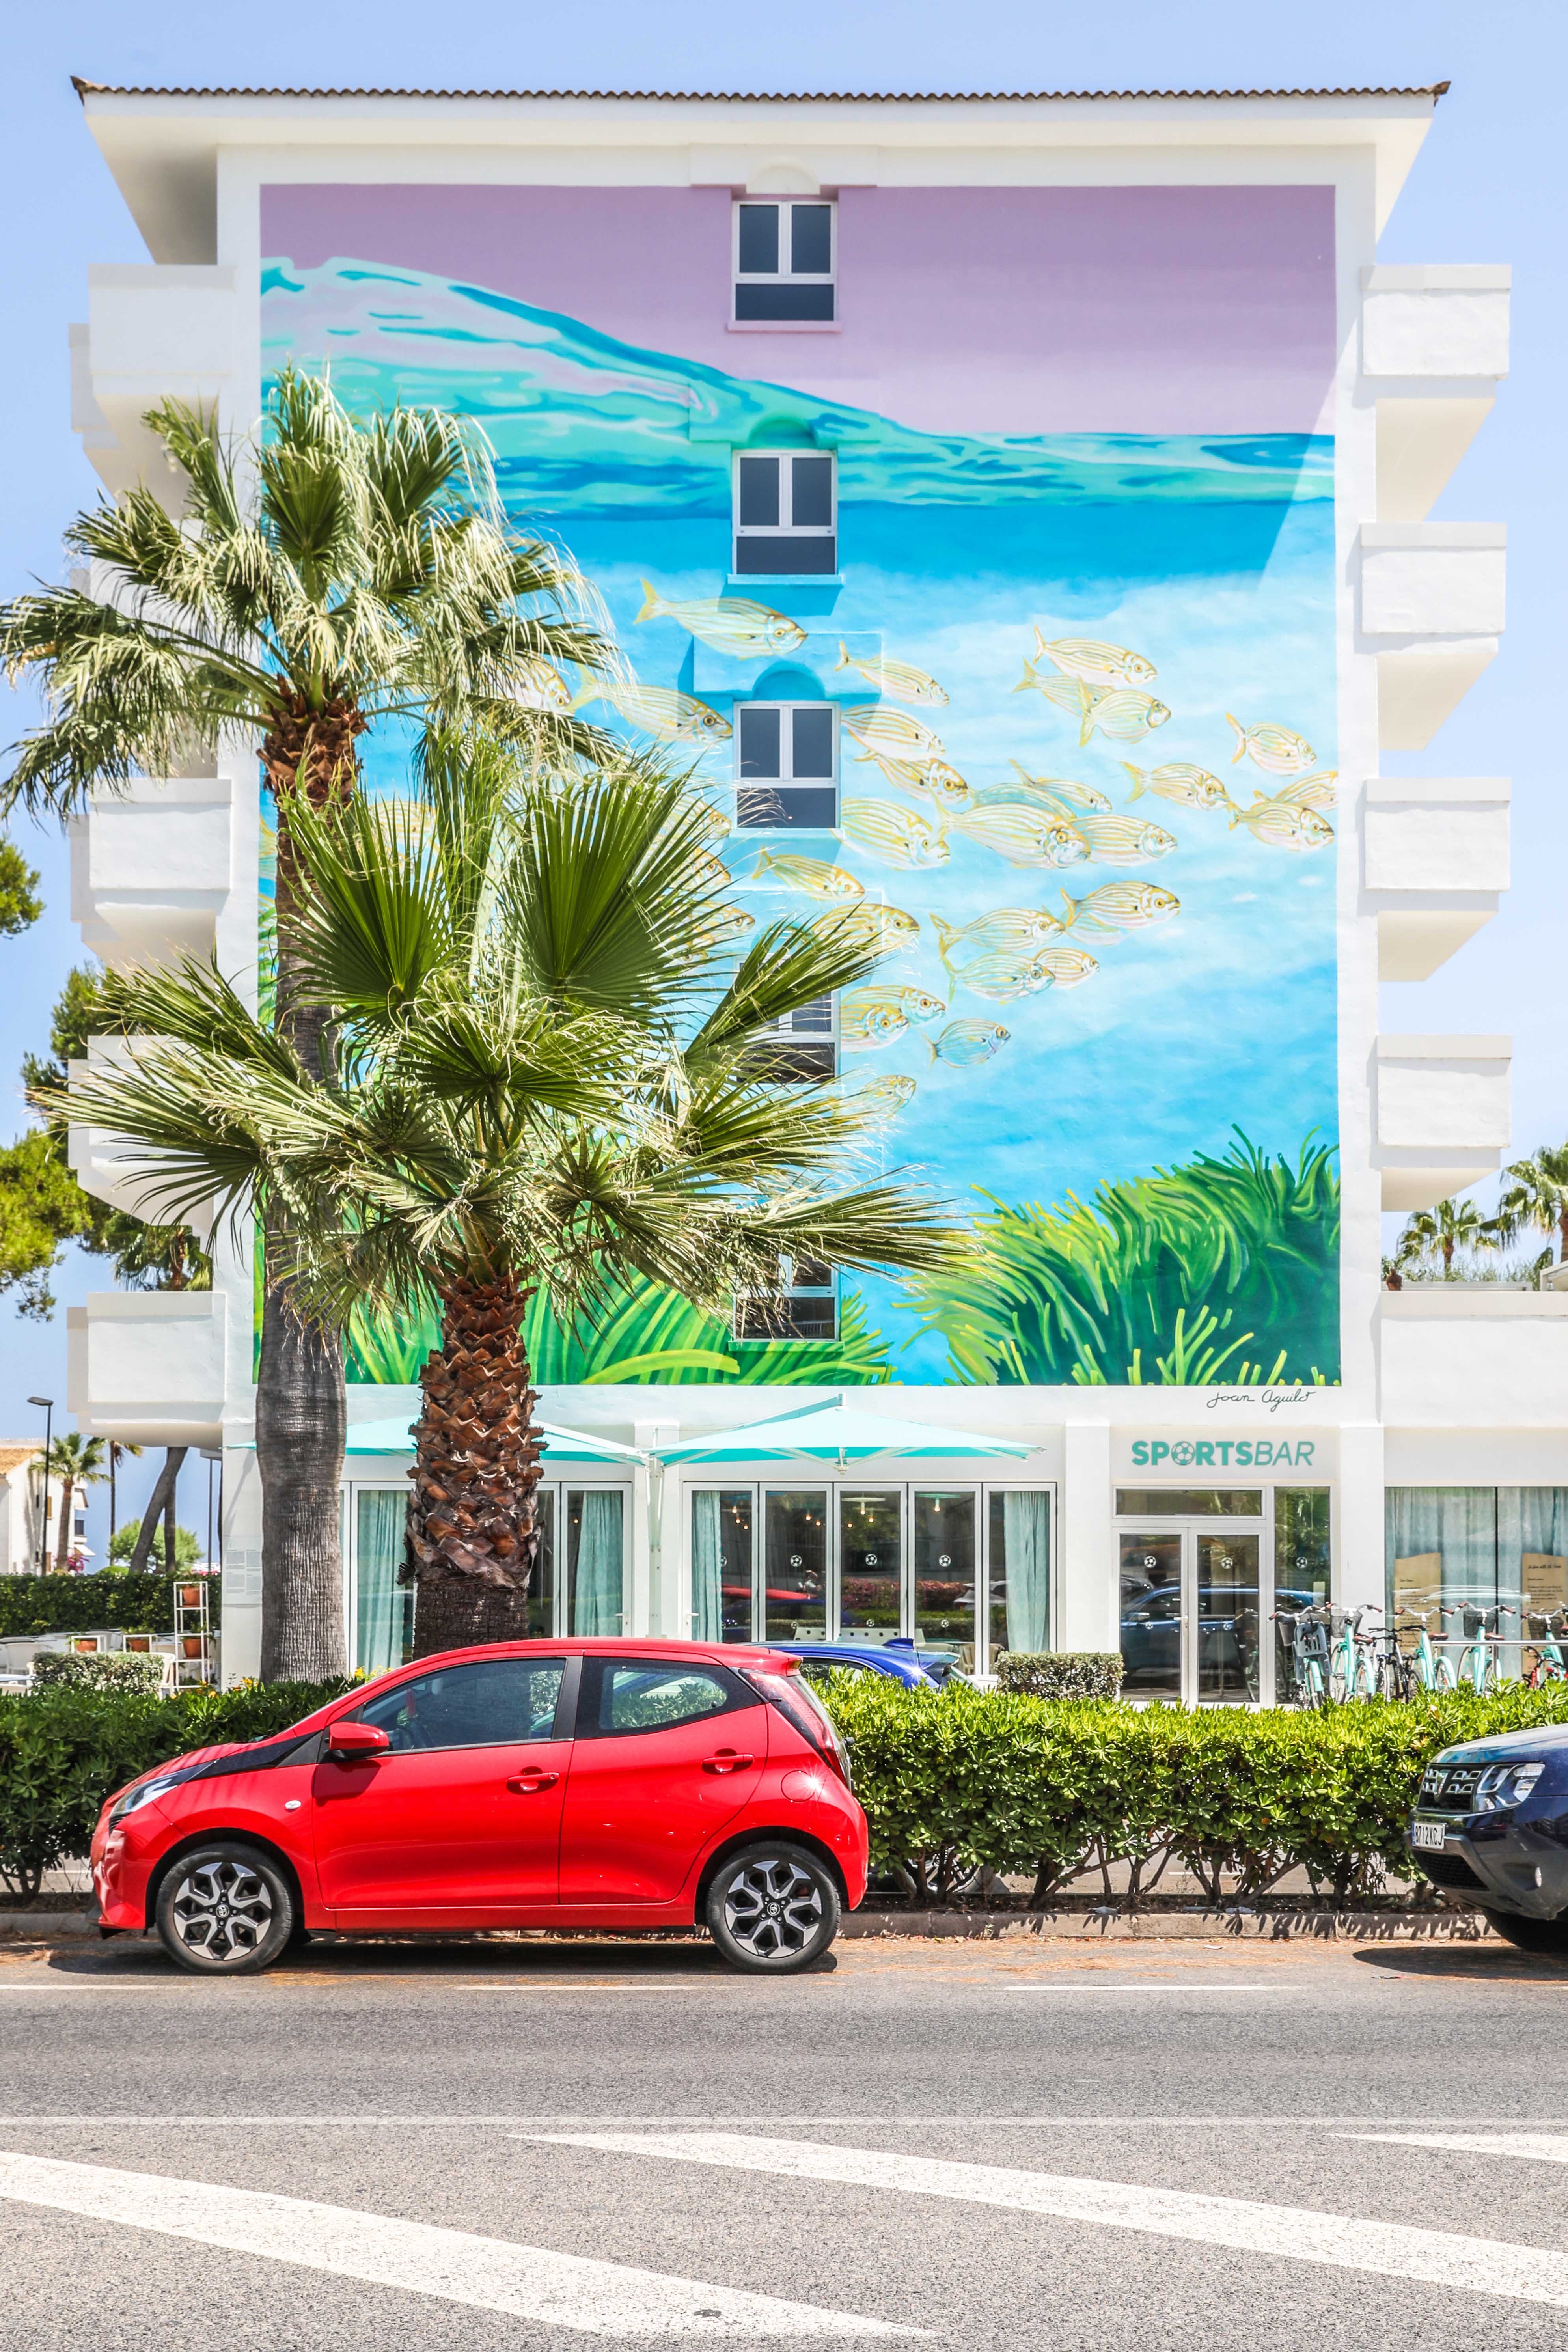 Did you know? Iberostar Alcudia Park Features a Mural by Local Artist Joan Aguiló